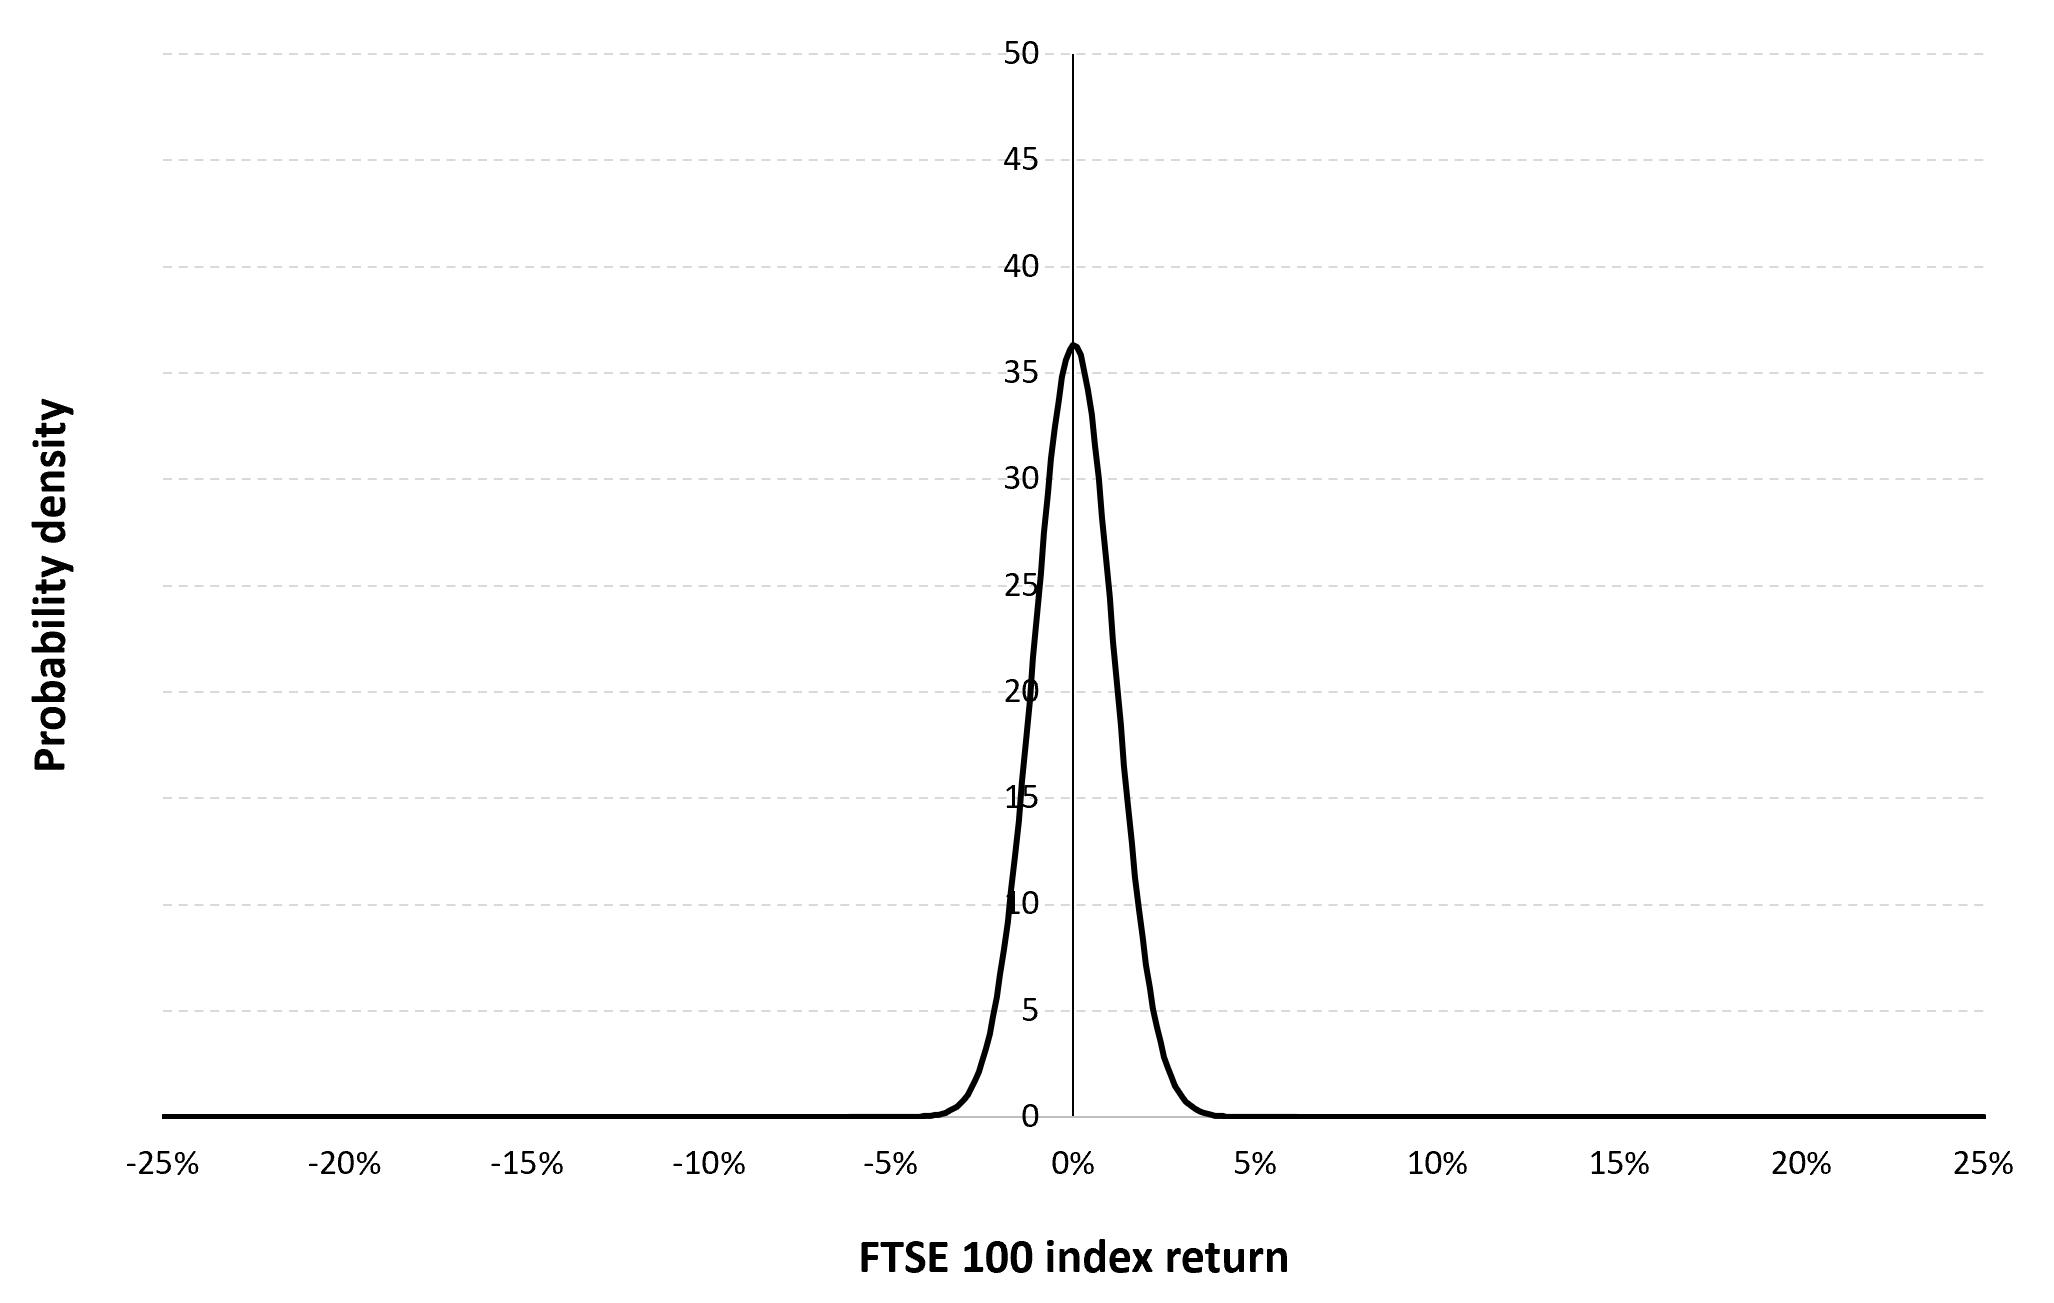 Gaussian distribution of the daily FTSE 100 index returns